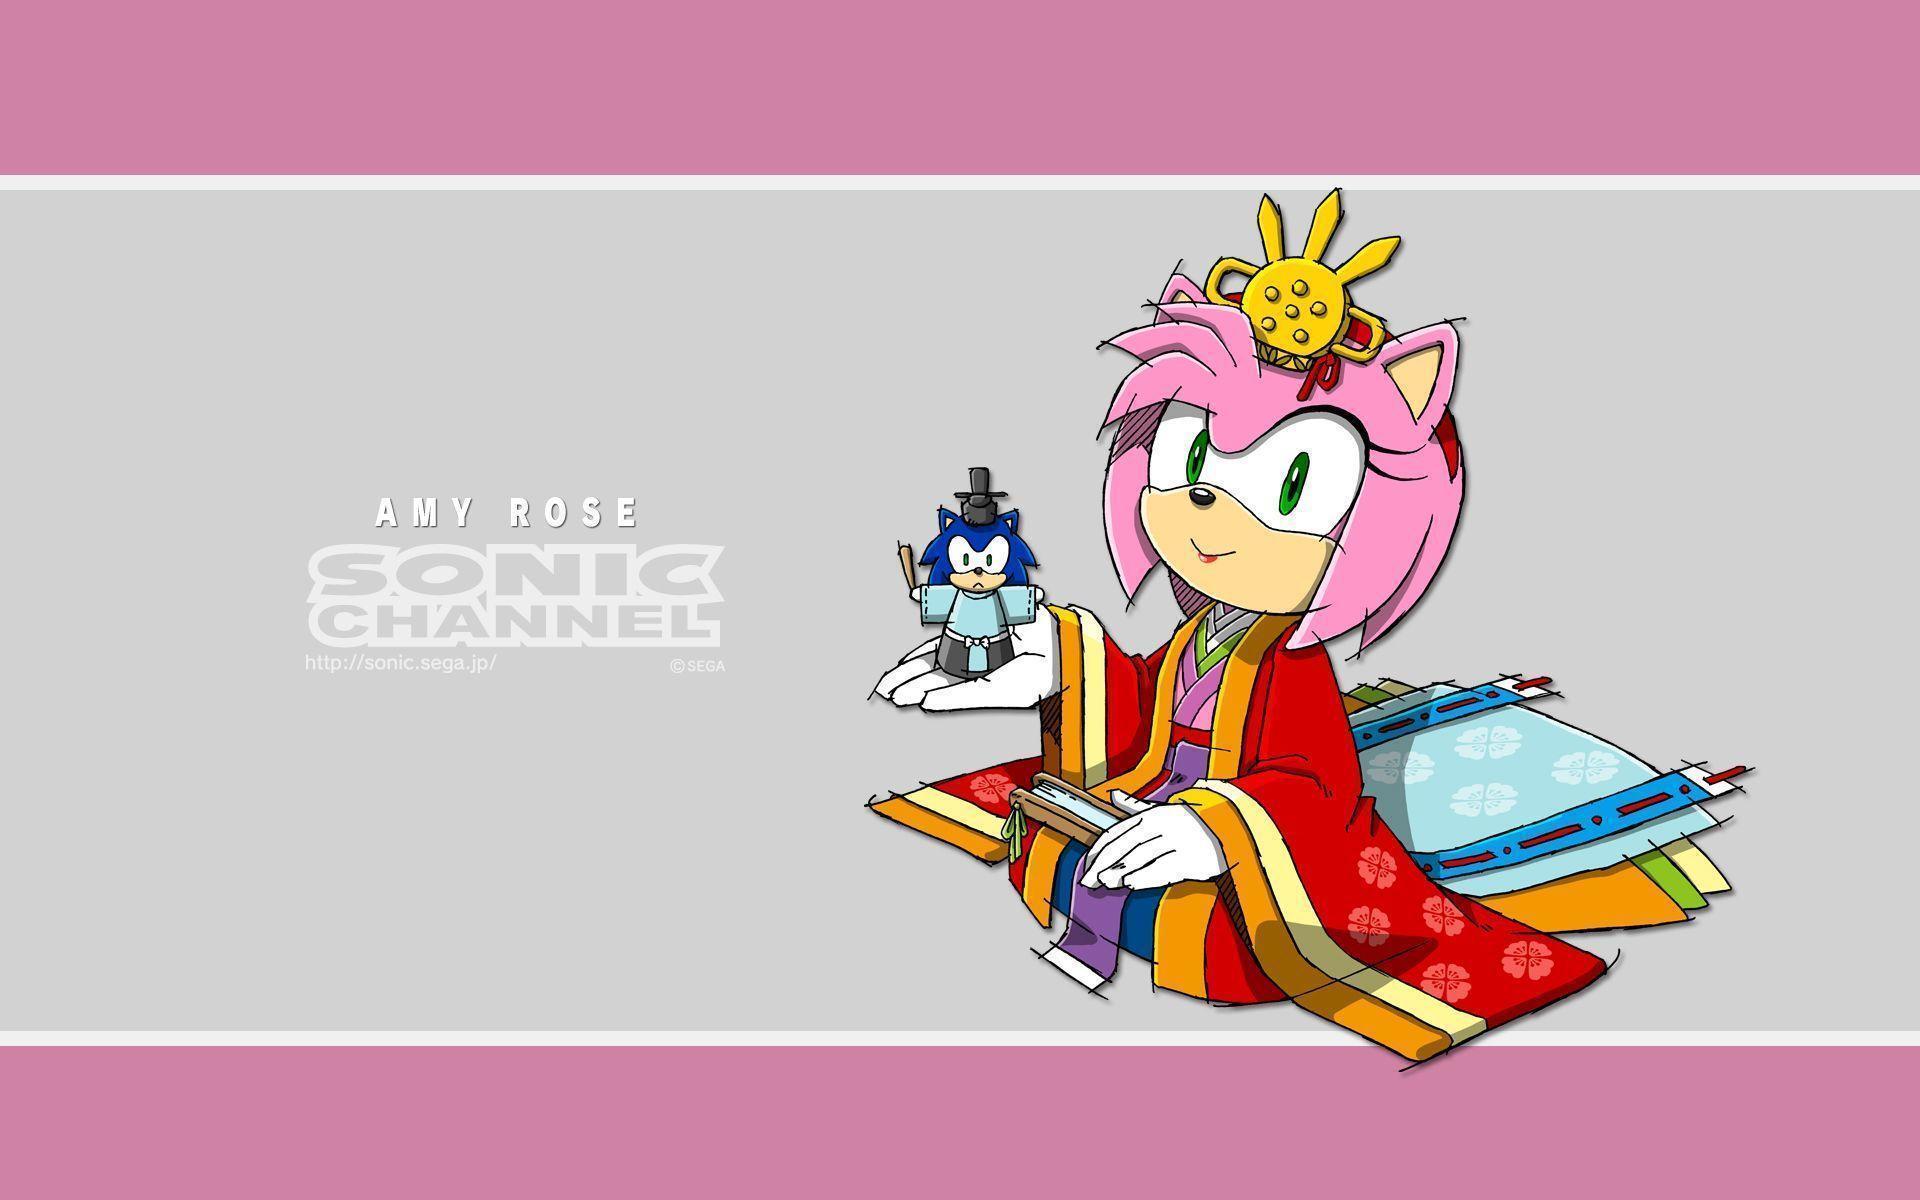 Video Game Sonic The Hedgehog Wallpaper 1920x1200 px Free Download